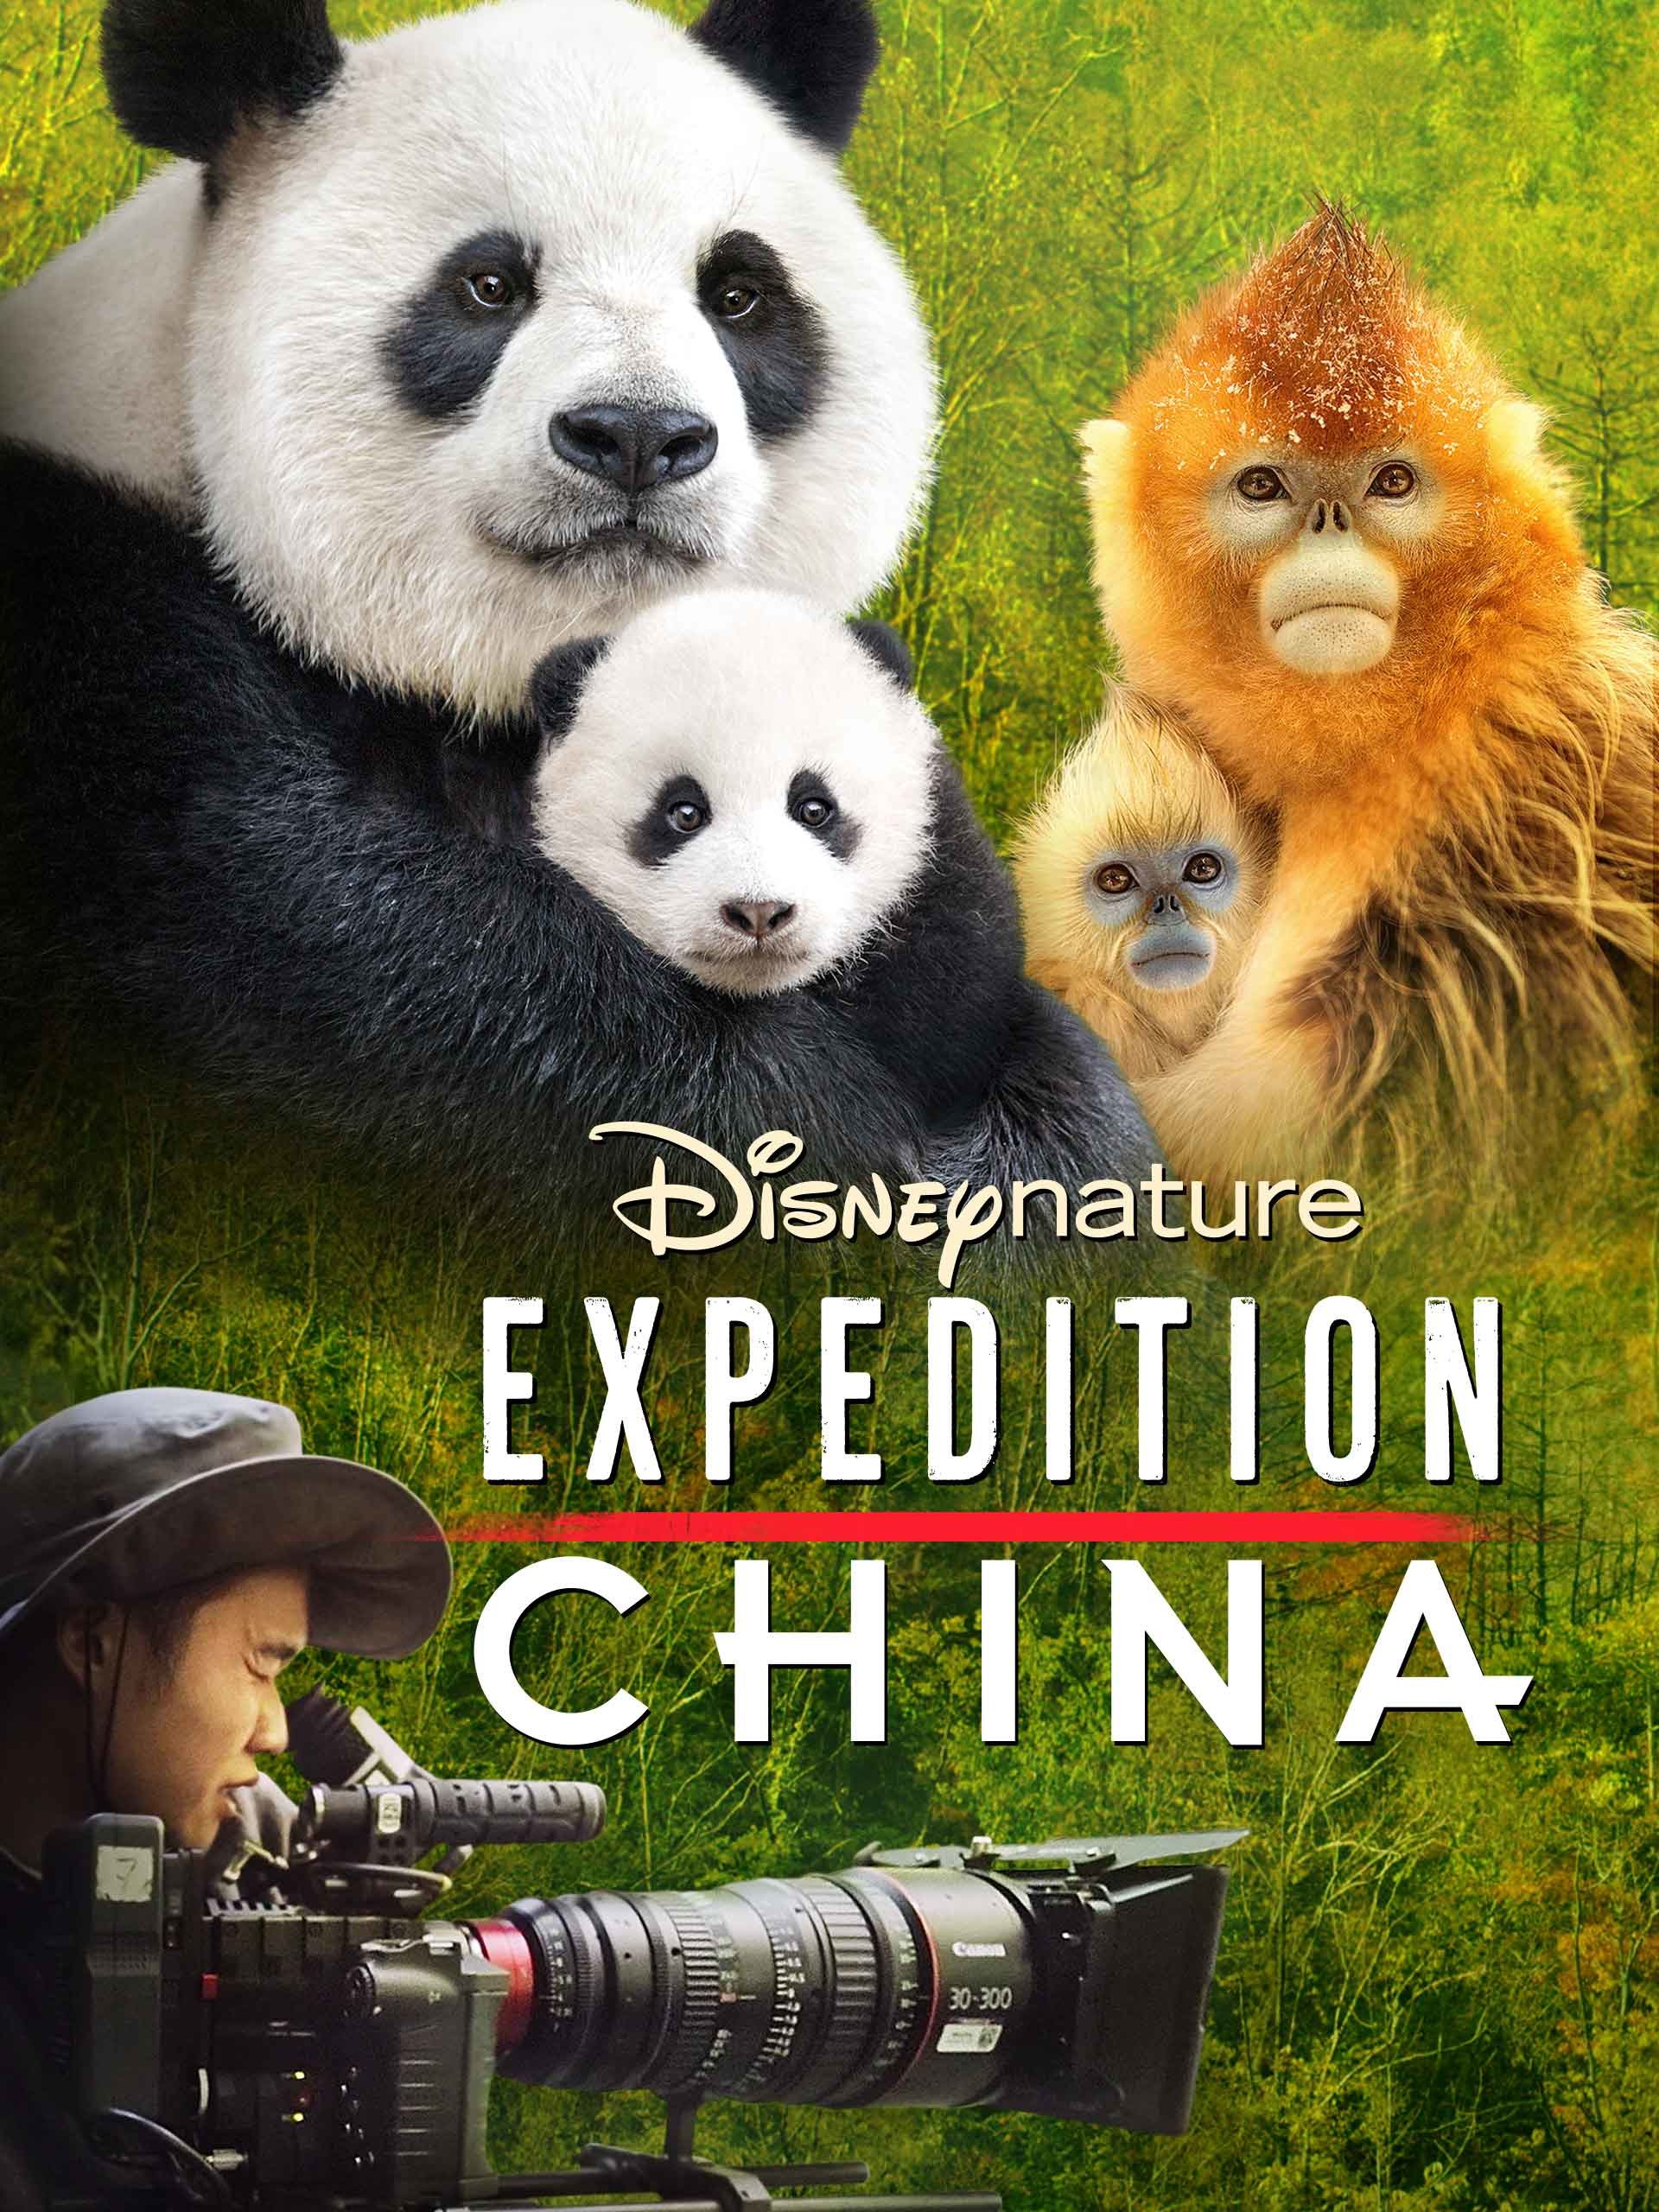 Disneynature Expedition China (Theatrical Version)